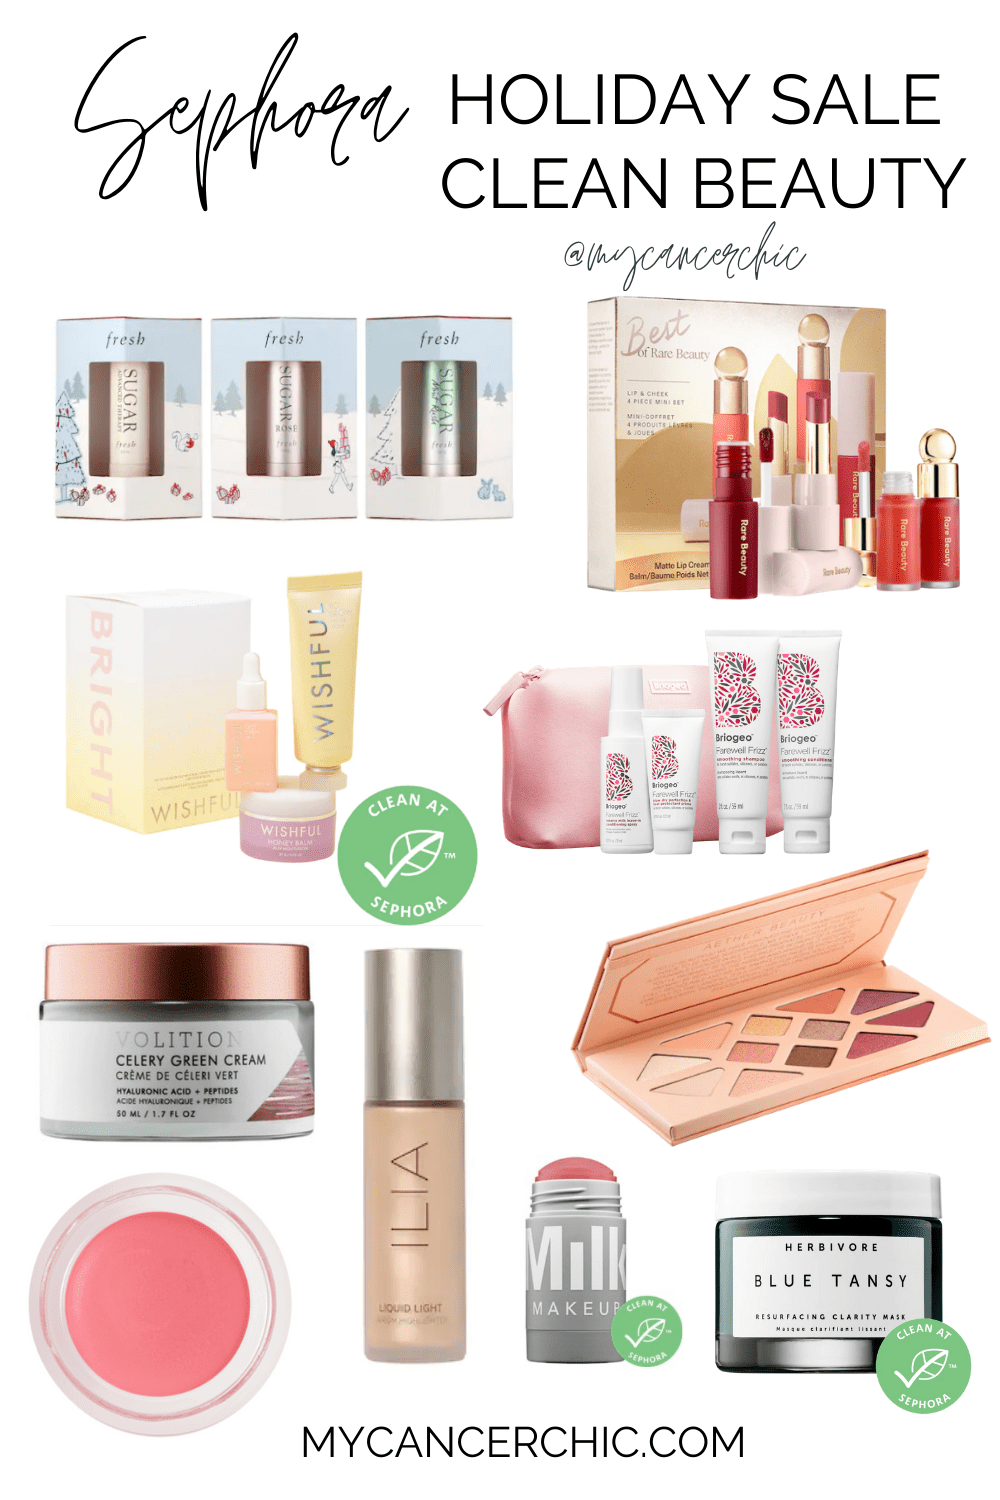 Sephora Holiday Sale Guide - Clean Beauty